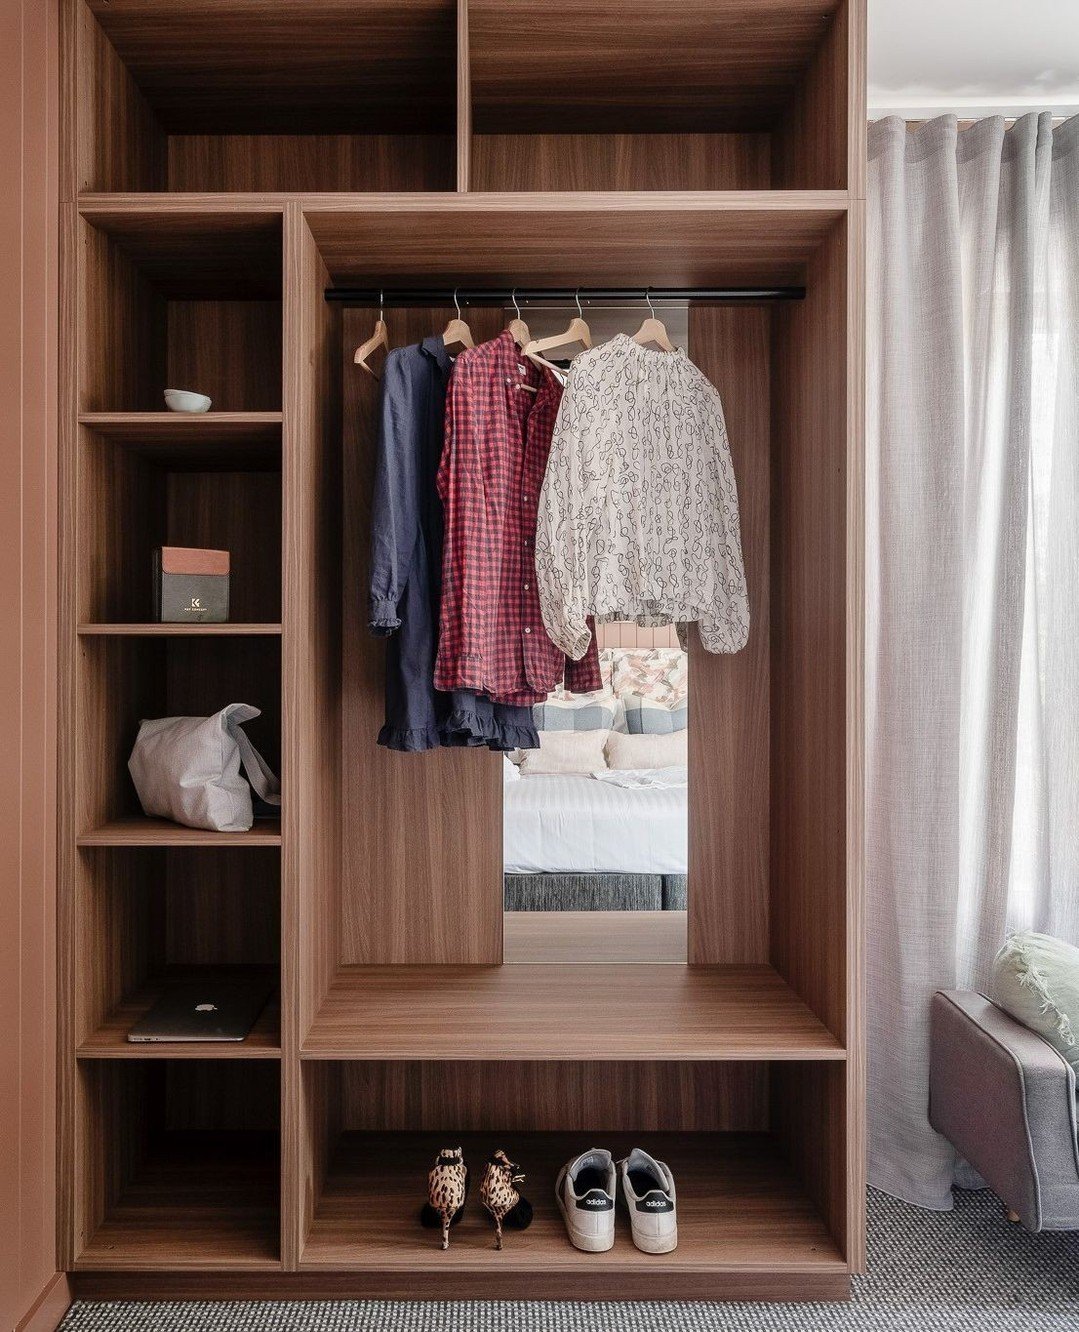 Built-in robes - the dilemma - do you add doors? Not when your materials are this hot. Here, we used the laminate Oiled Legno in a Chalk finish from @laminexau. With its rich red-toned woodgrain and soft linear structure with subtle colour variation,